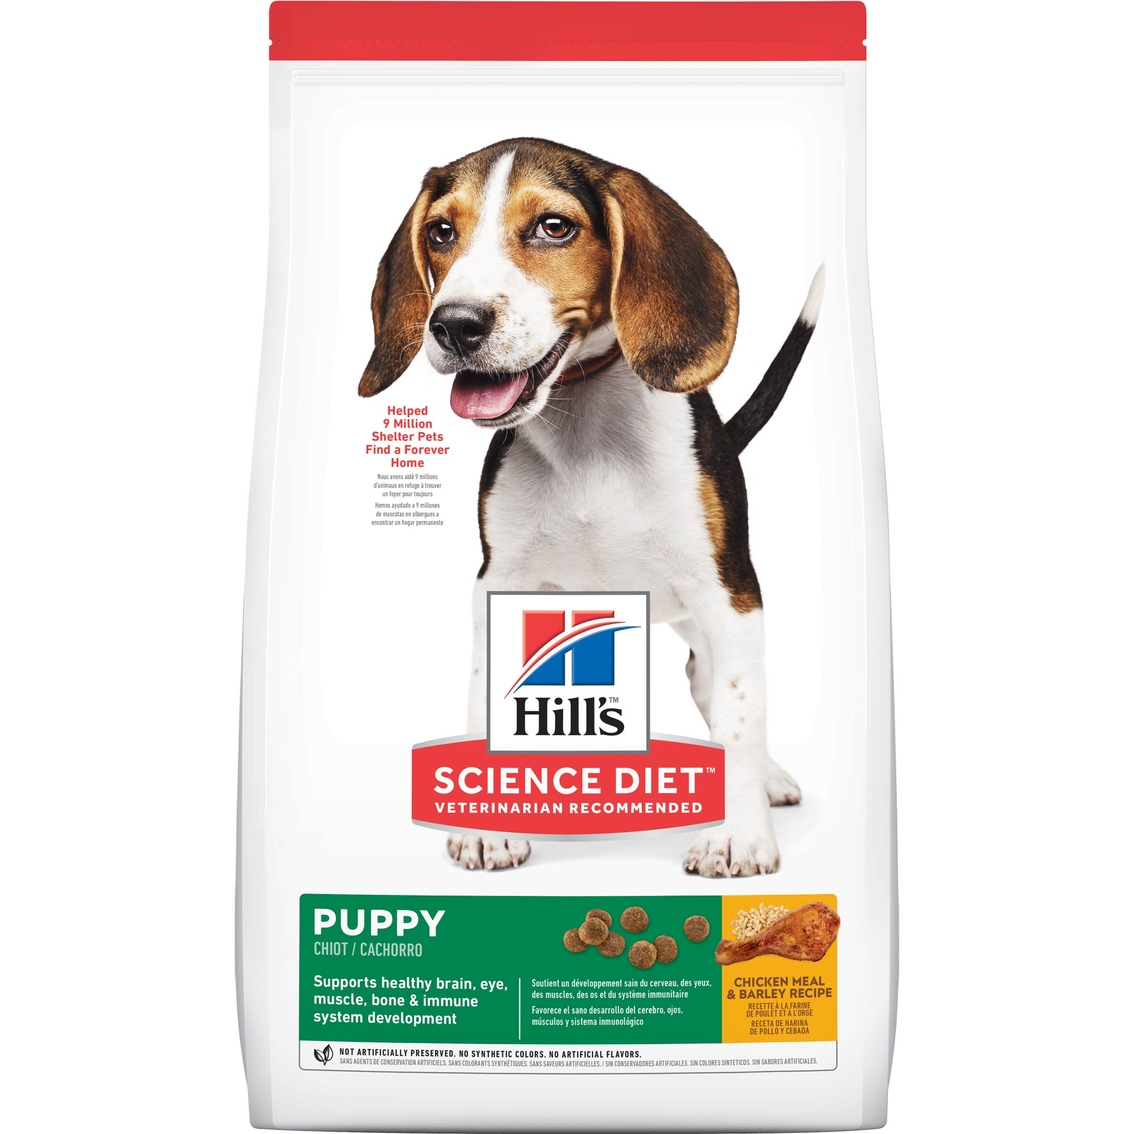 Military/Veterans: 25% off on Science Diet Puppy Healthy Development Dry Dog Food 4.5 lb ($12.82)